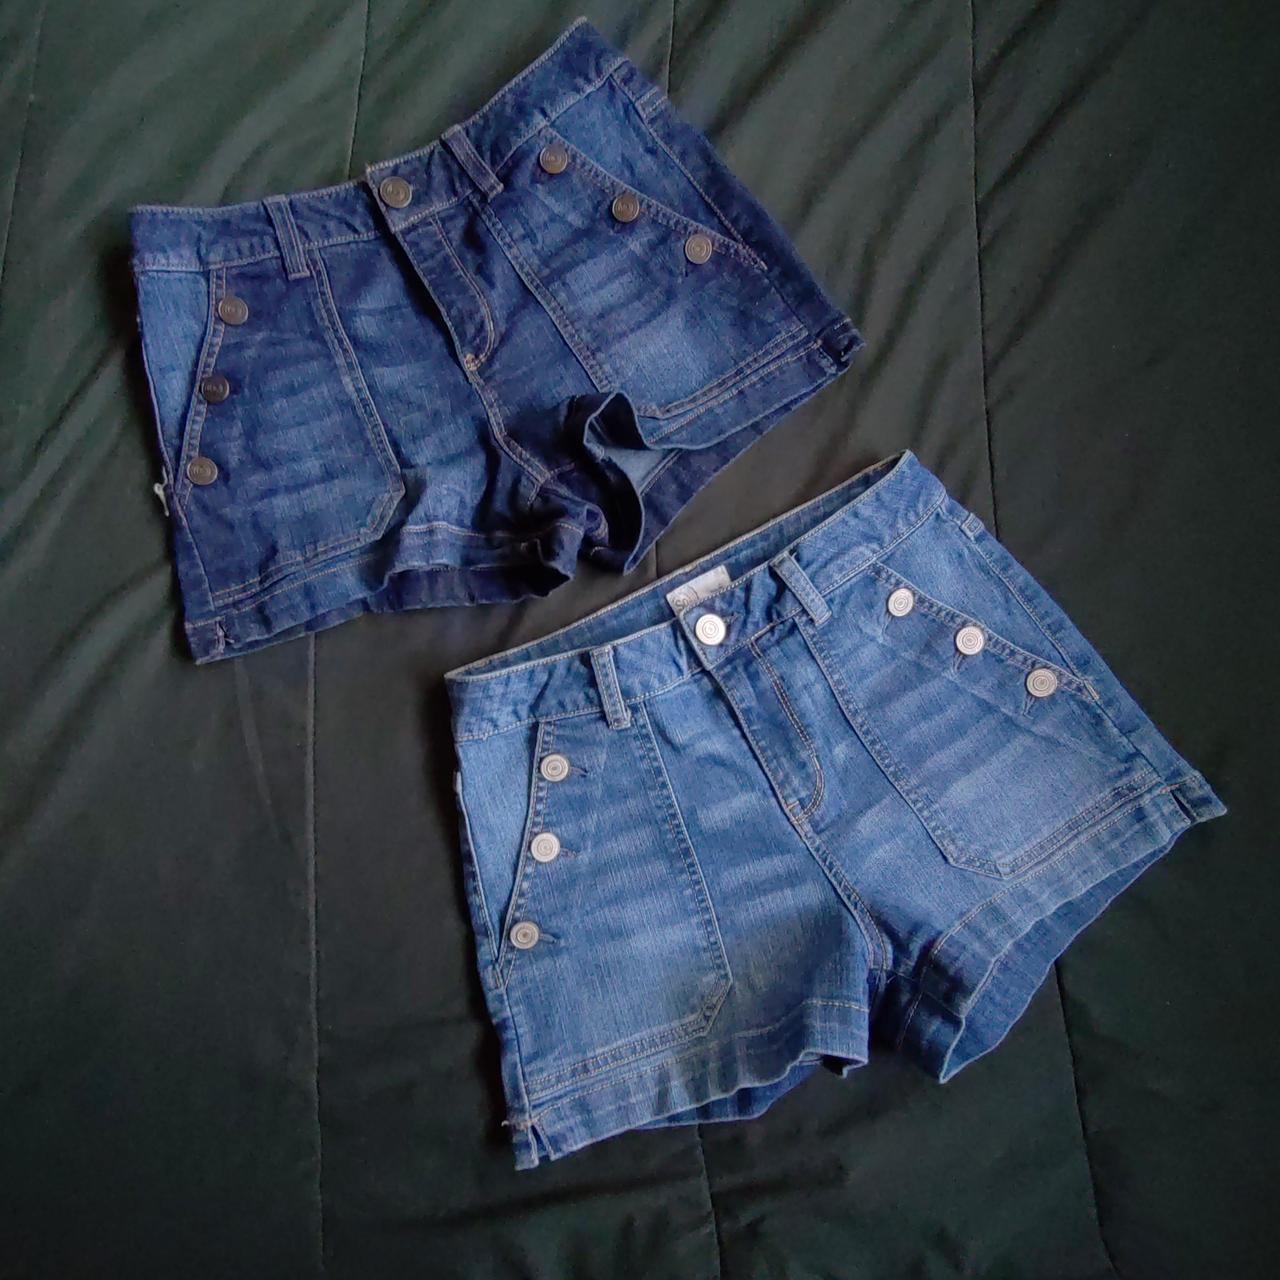 Product Image 1 - Two pairs of women's size